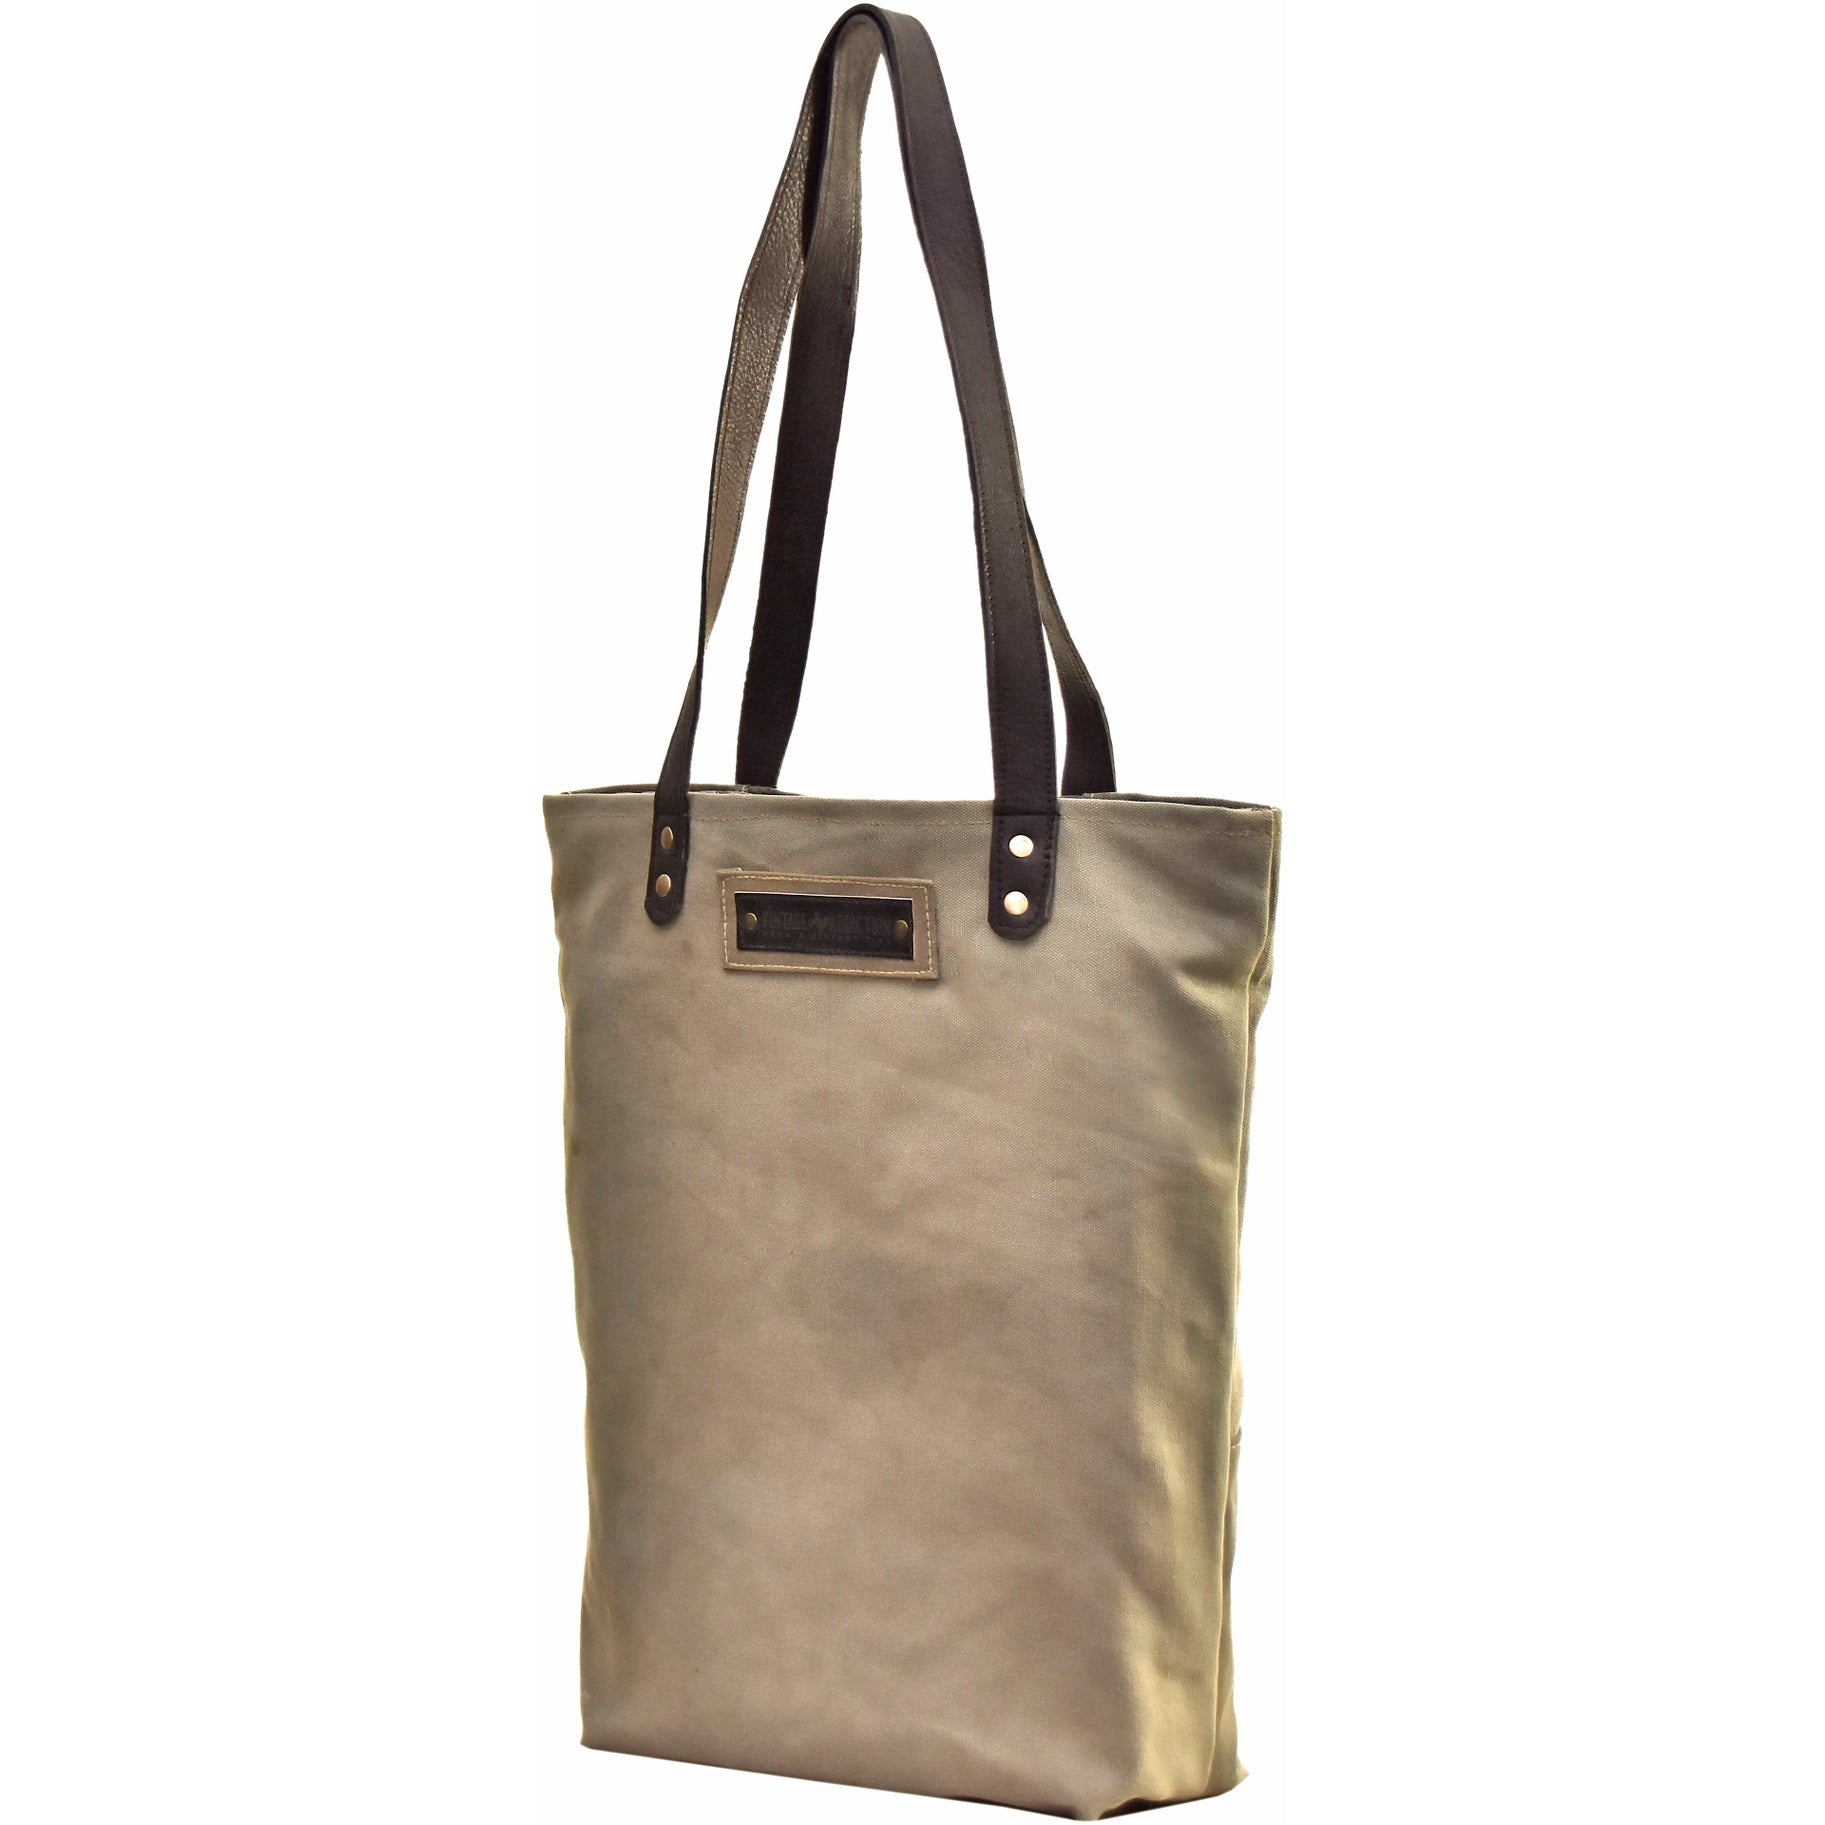 Dirt Road Junkin' Recycled Military Tent Tote - Closeout Item